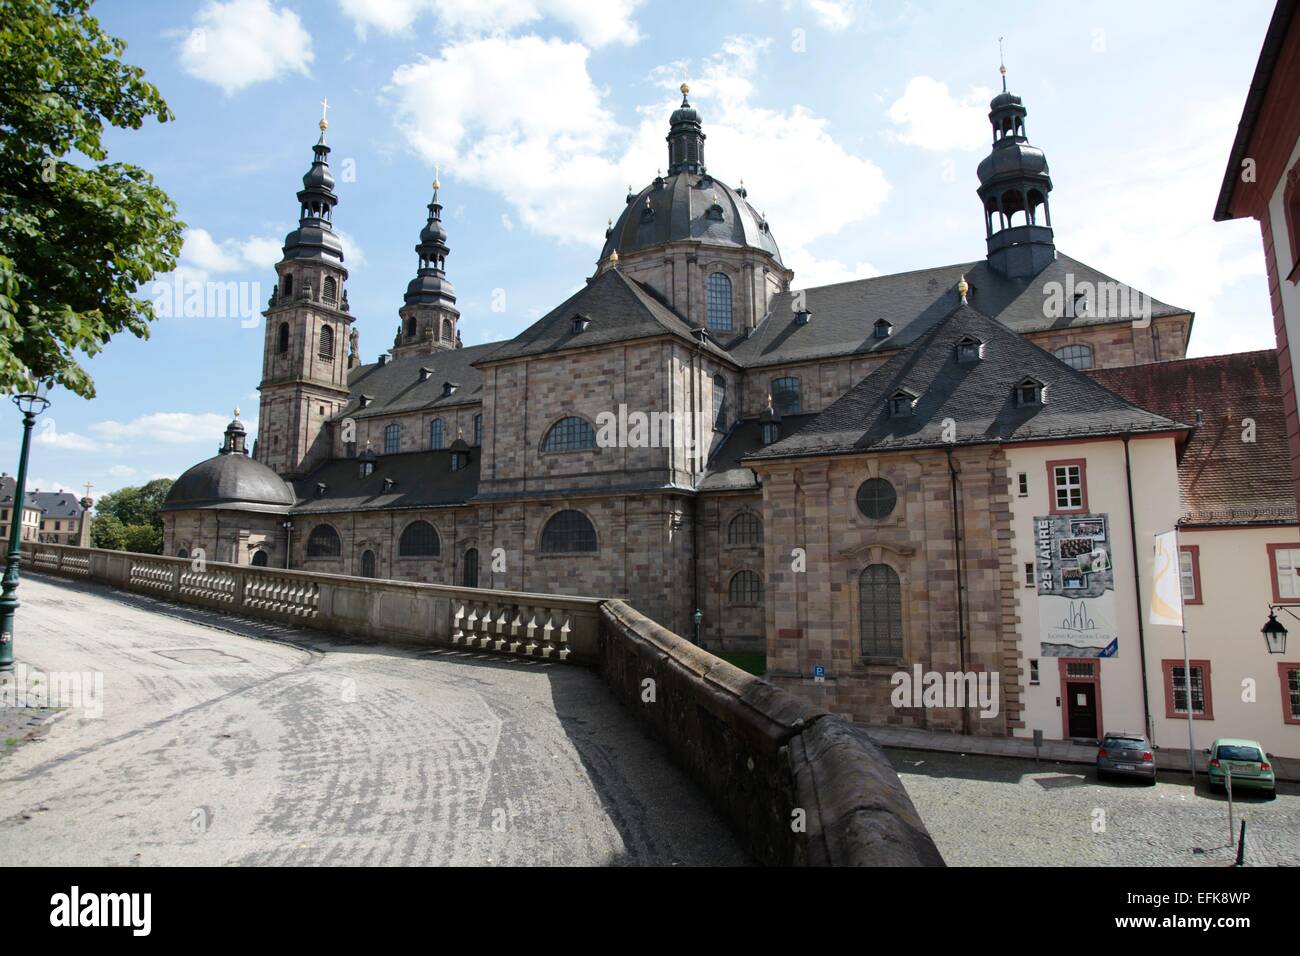 The Fulda Cathedral is the landmark of Fulda and he is the most important Baroque church of Hessen. This catholic church was built between 1704 and 1712 by the famous architect Johann Dientzenhofer. Photo: Klaus Nowottnick Date: August 8, 2014 Stock Photo